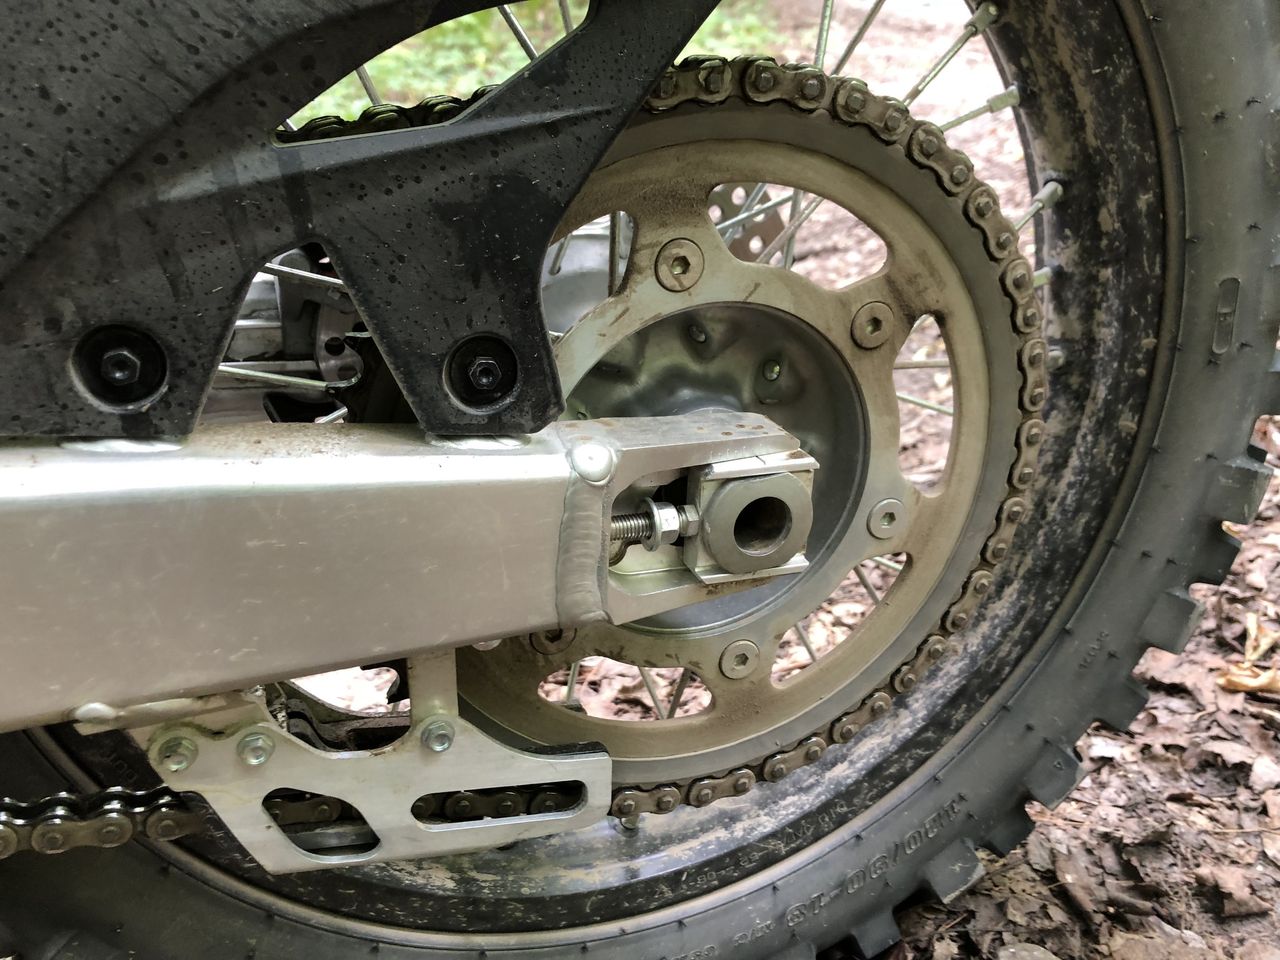 Rubber cush on rear sprocket to reduce noise... and life of sprocket?